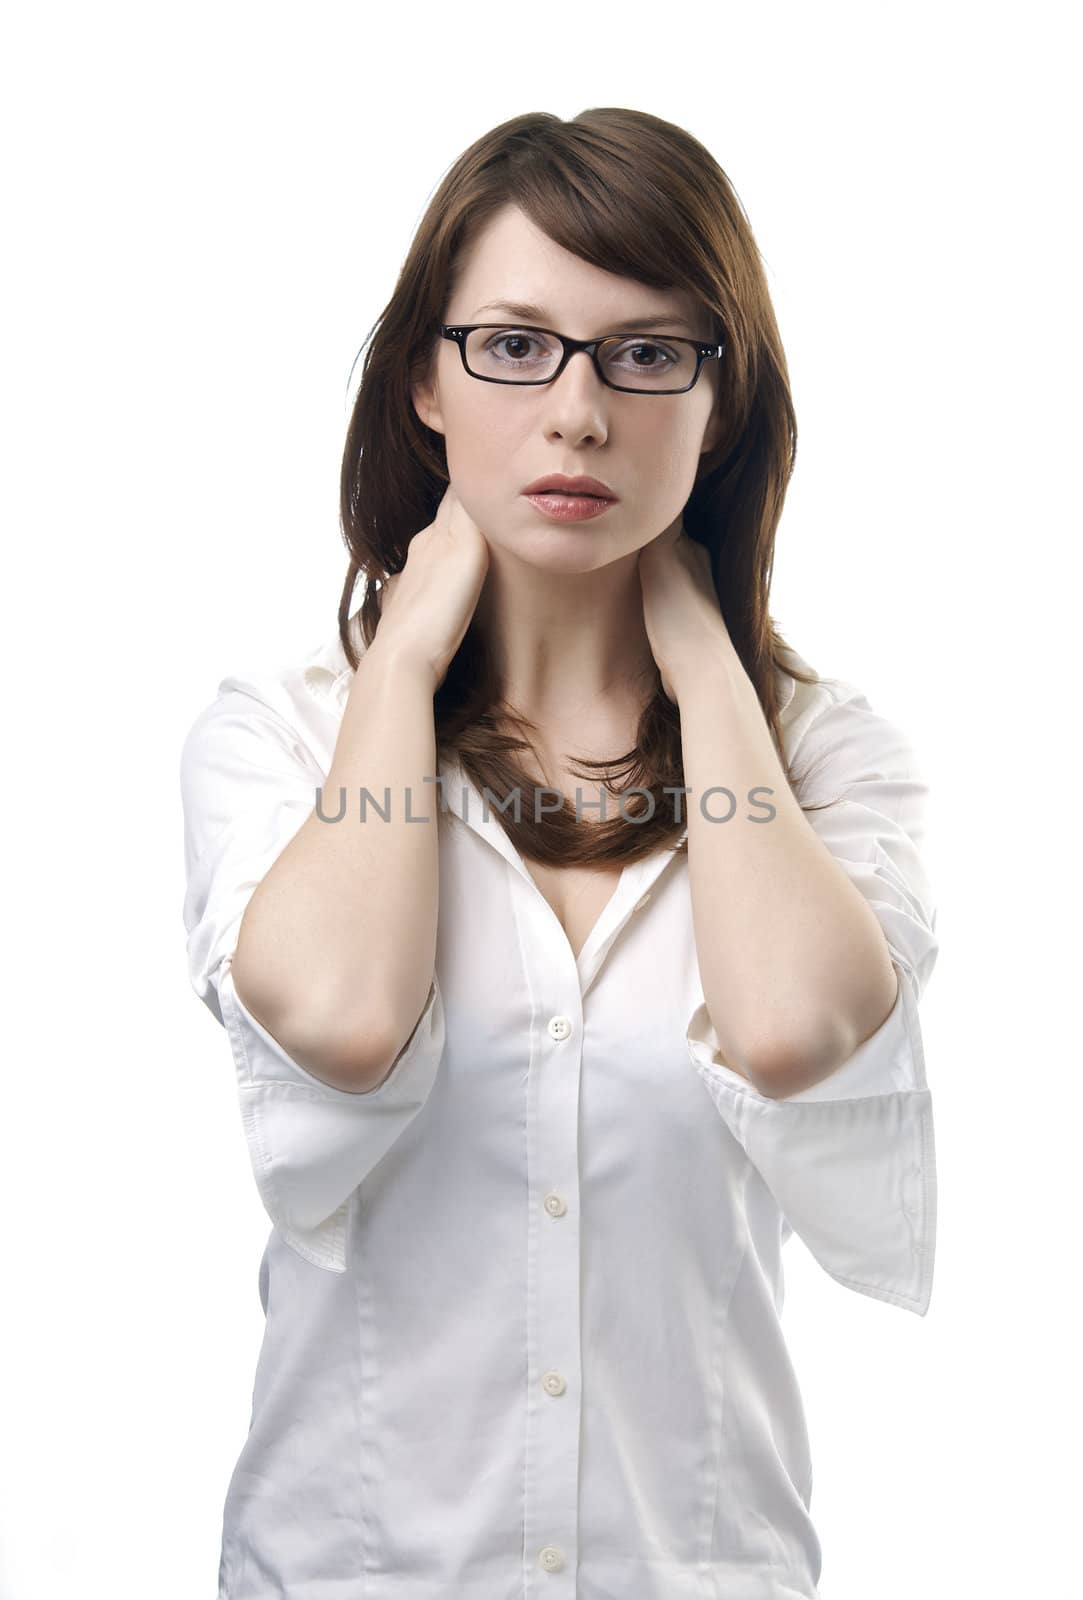 Long Haired Woman with Eyeglasses